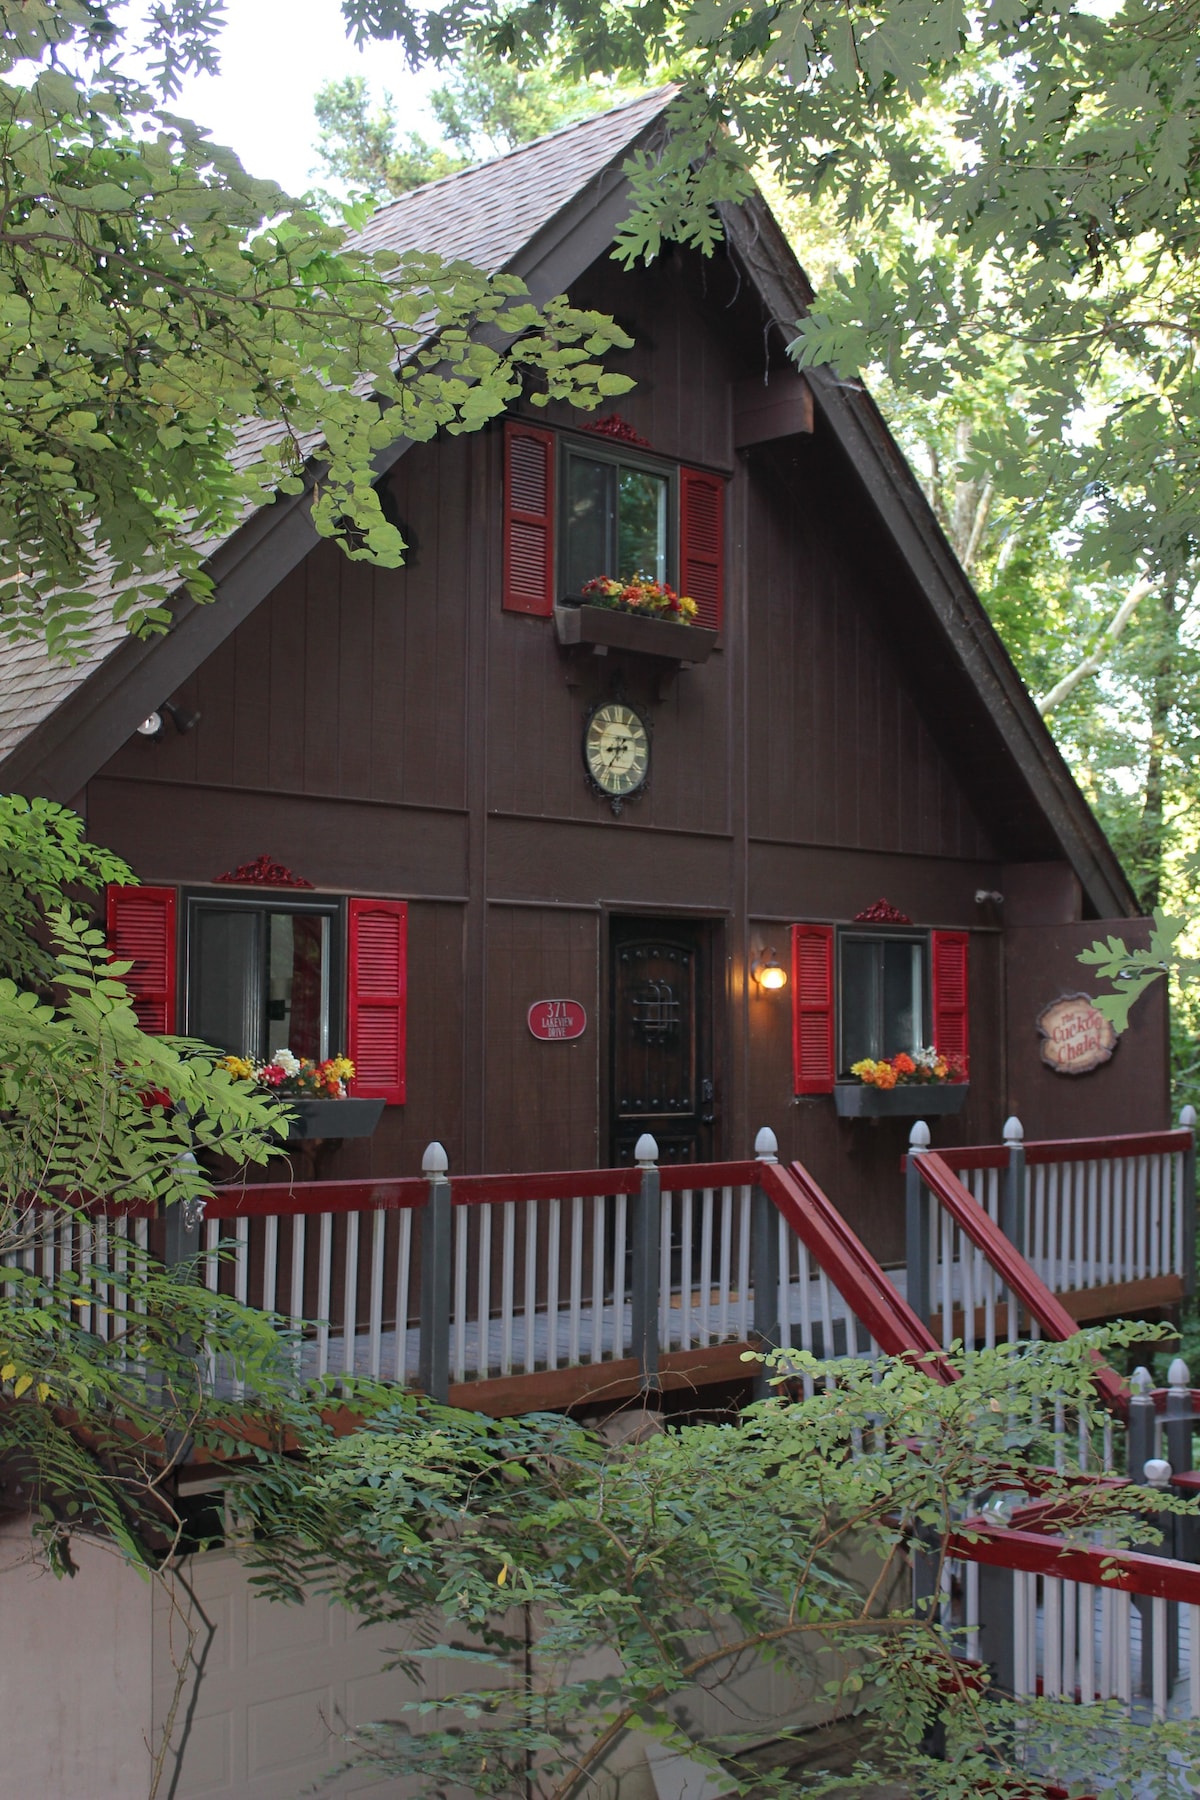 The Cuckoo Chalet